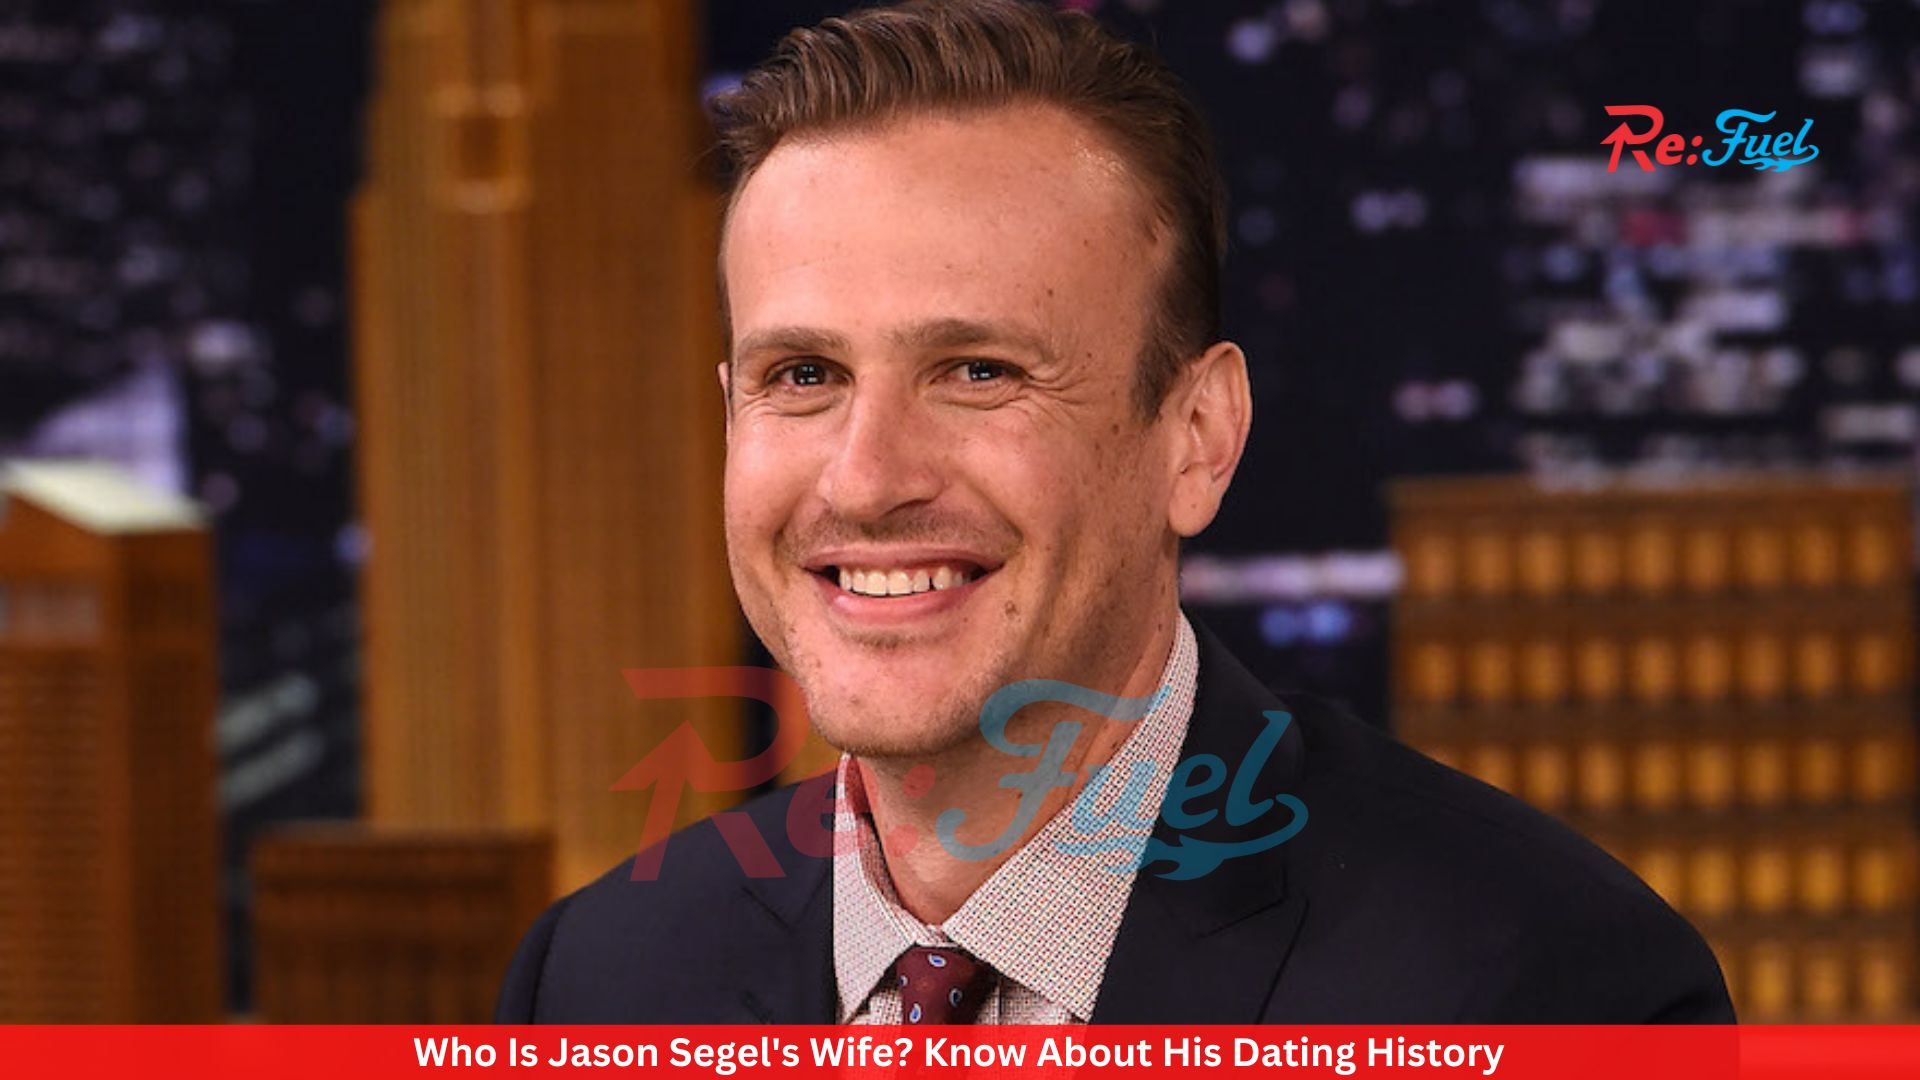 Who Is Jason Segel's Wife? Know About His Dating History